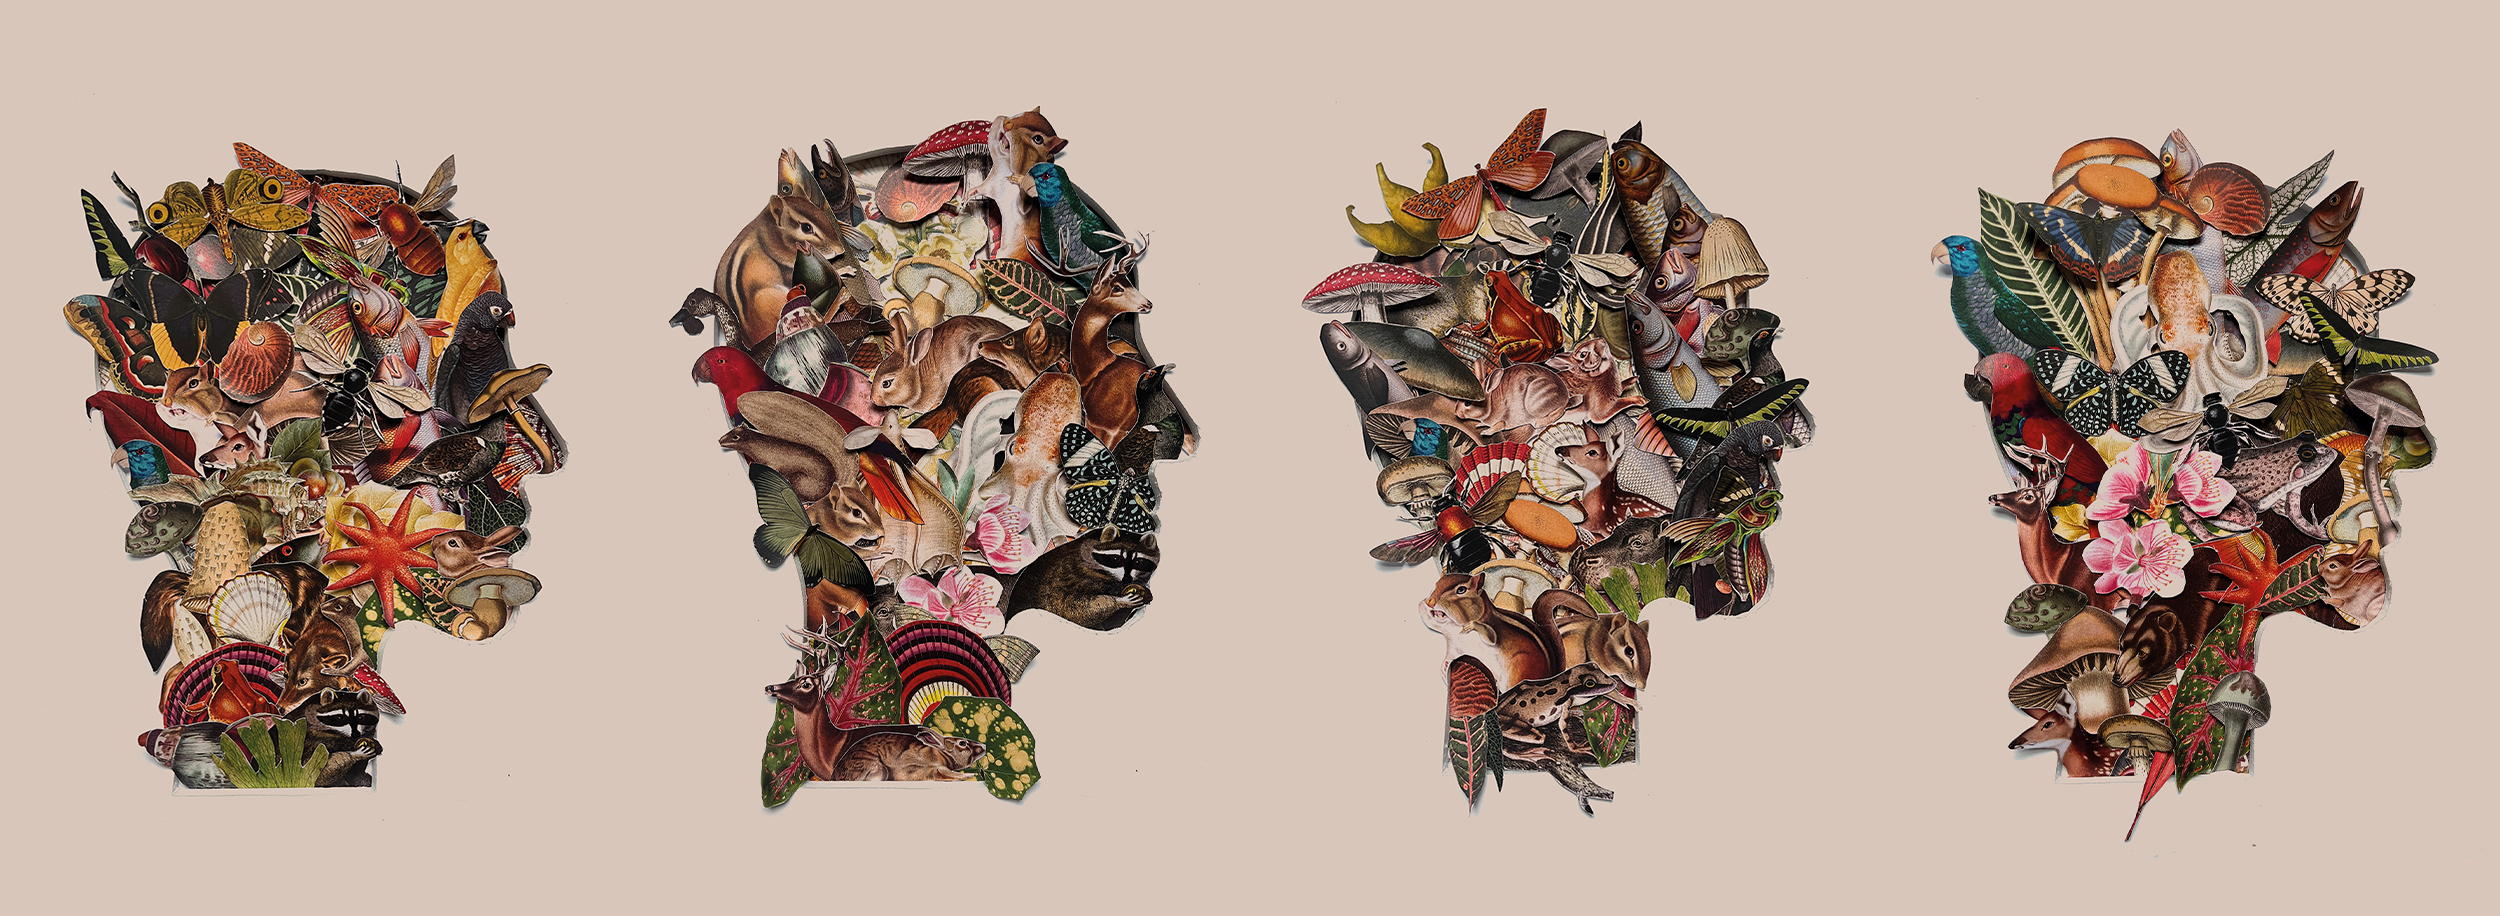 Head Collage by Jake Cook showing vintage nature illustrations in a profile head shape.